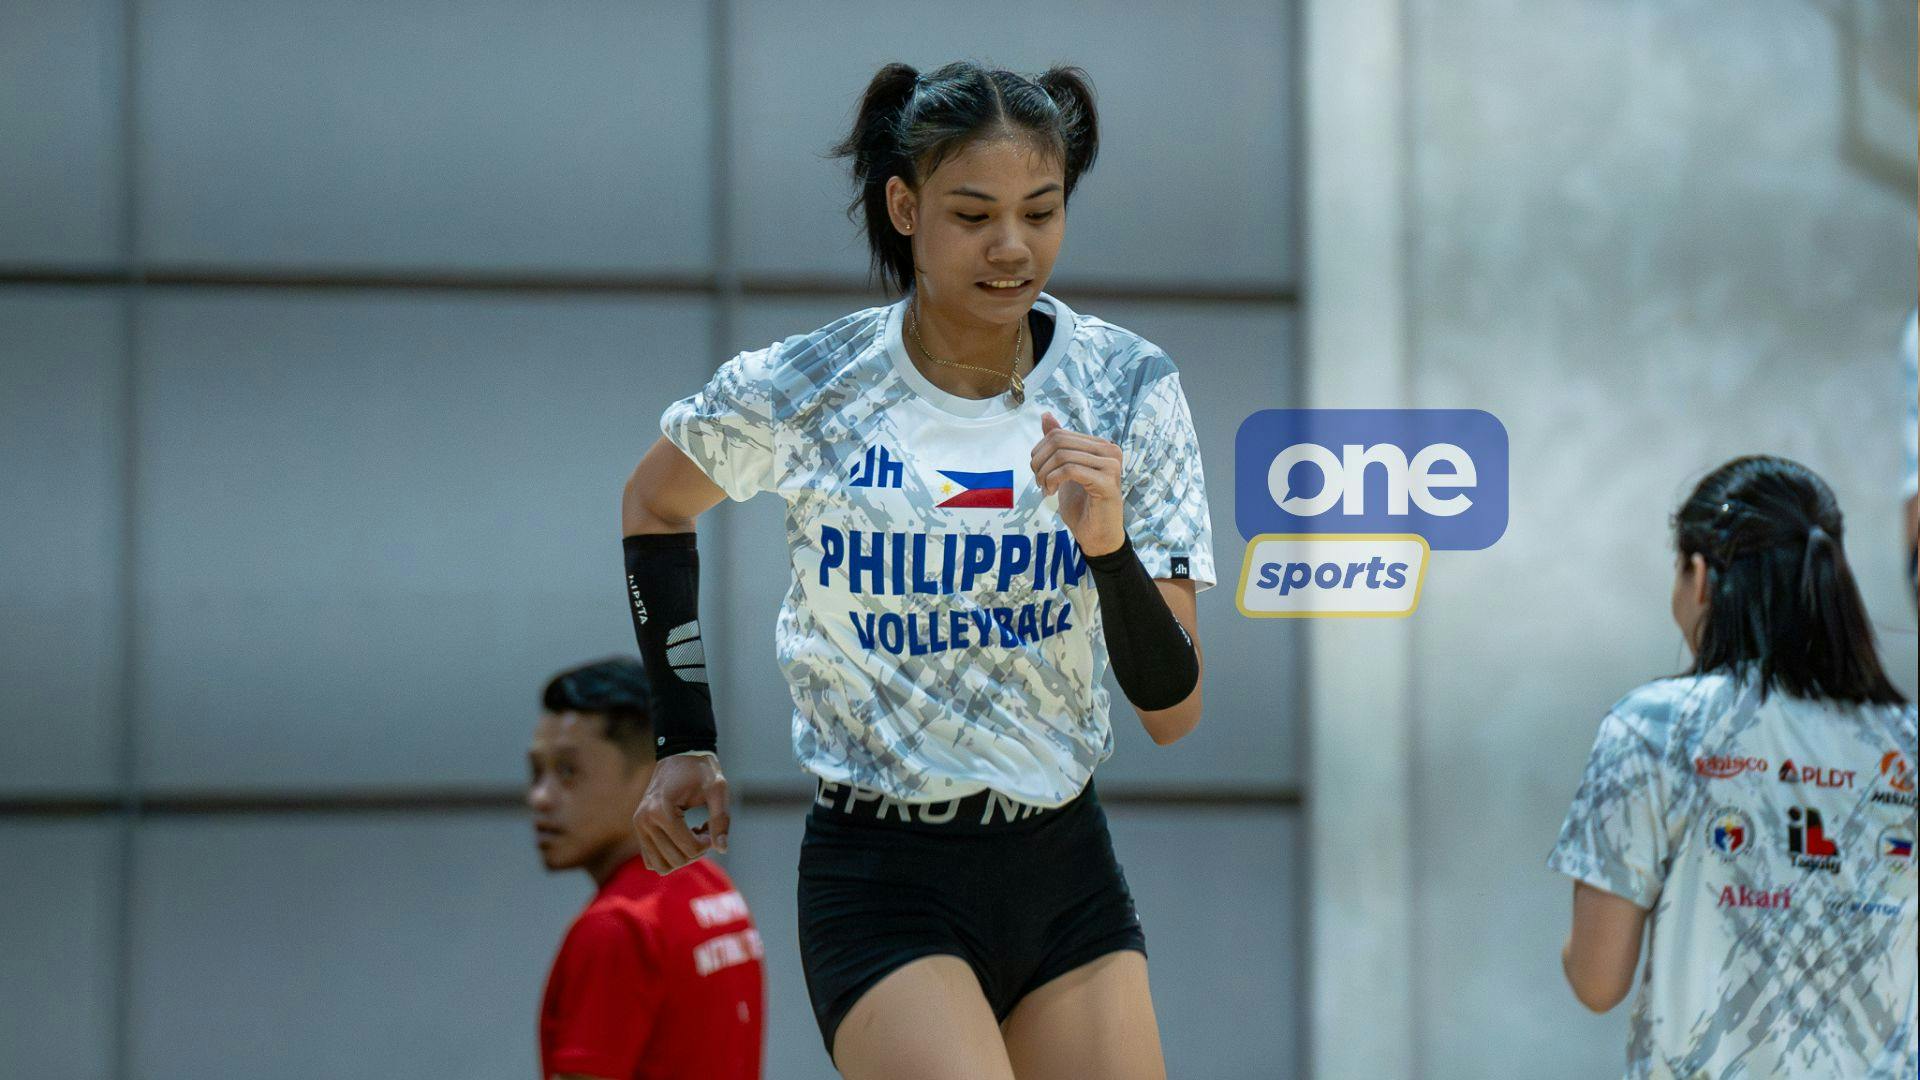 DLSU ace Angel Canino eyes higher level of play with Alas Pilipinas than her UAAP performances